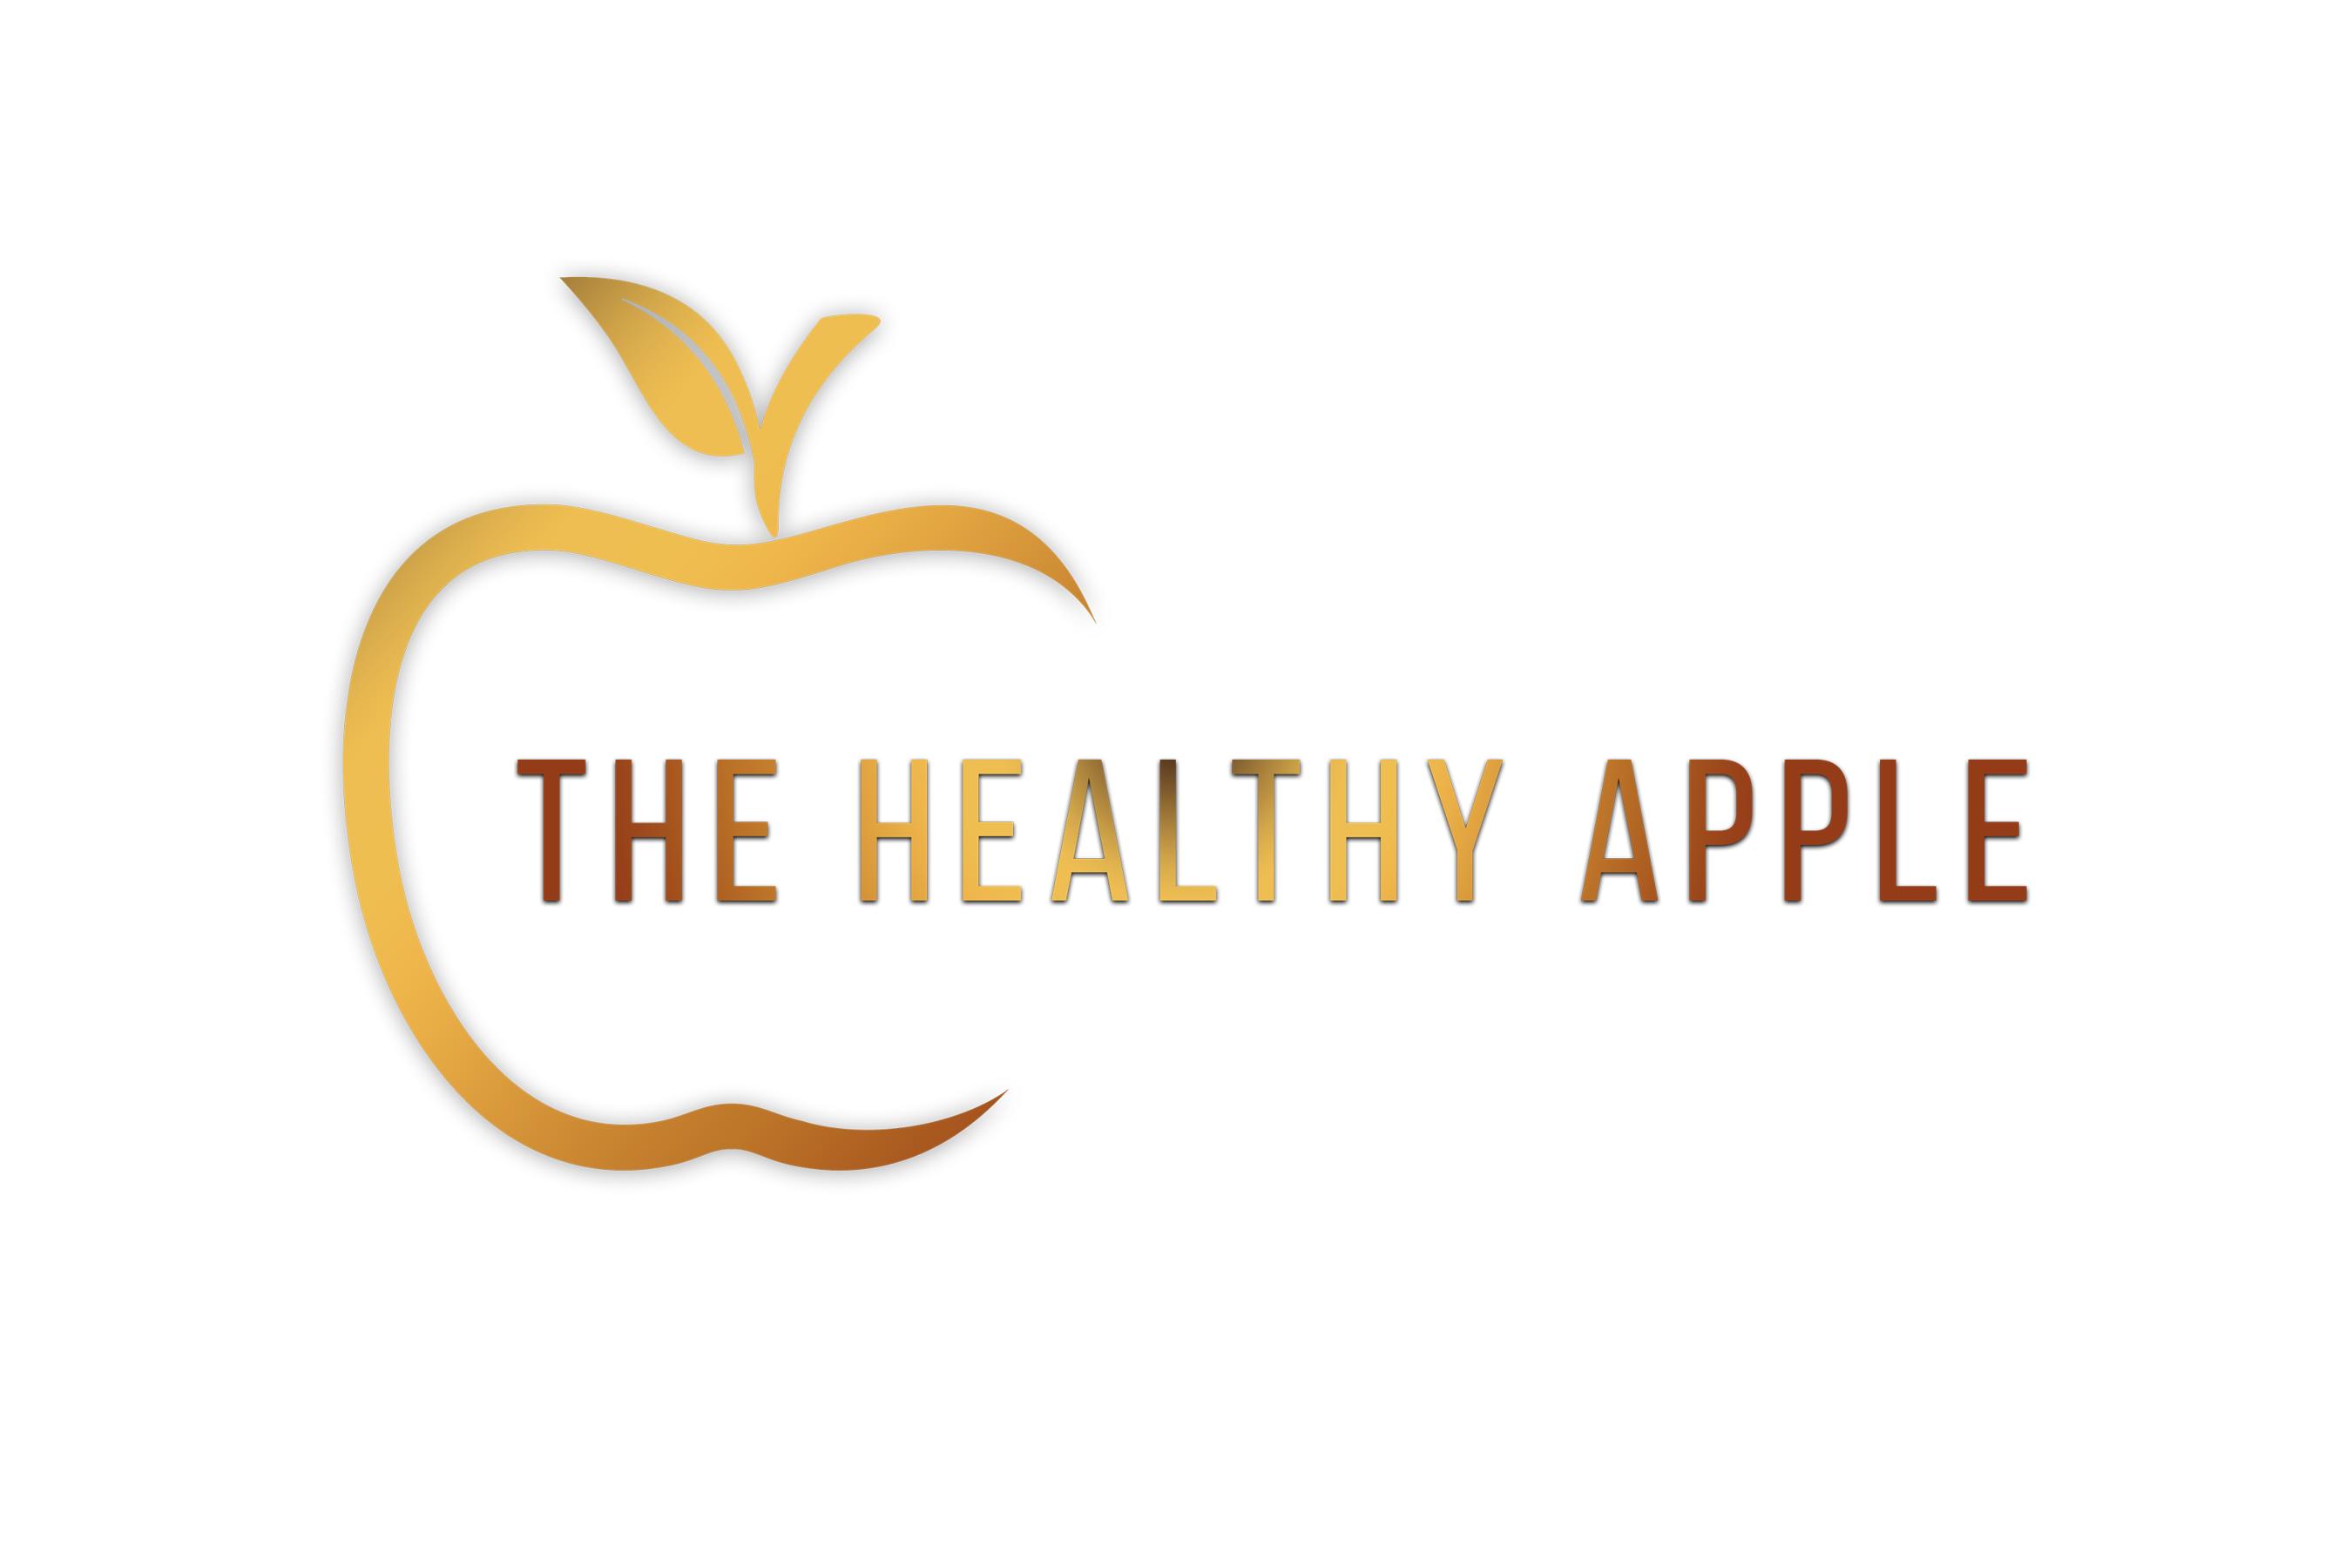 The Healthy Apple